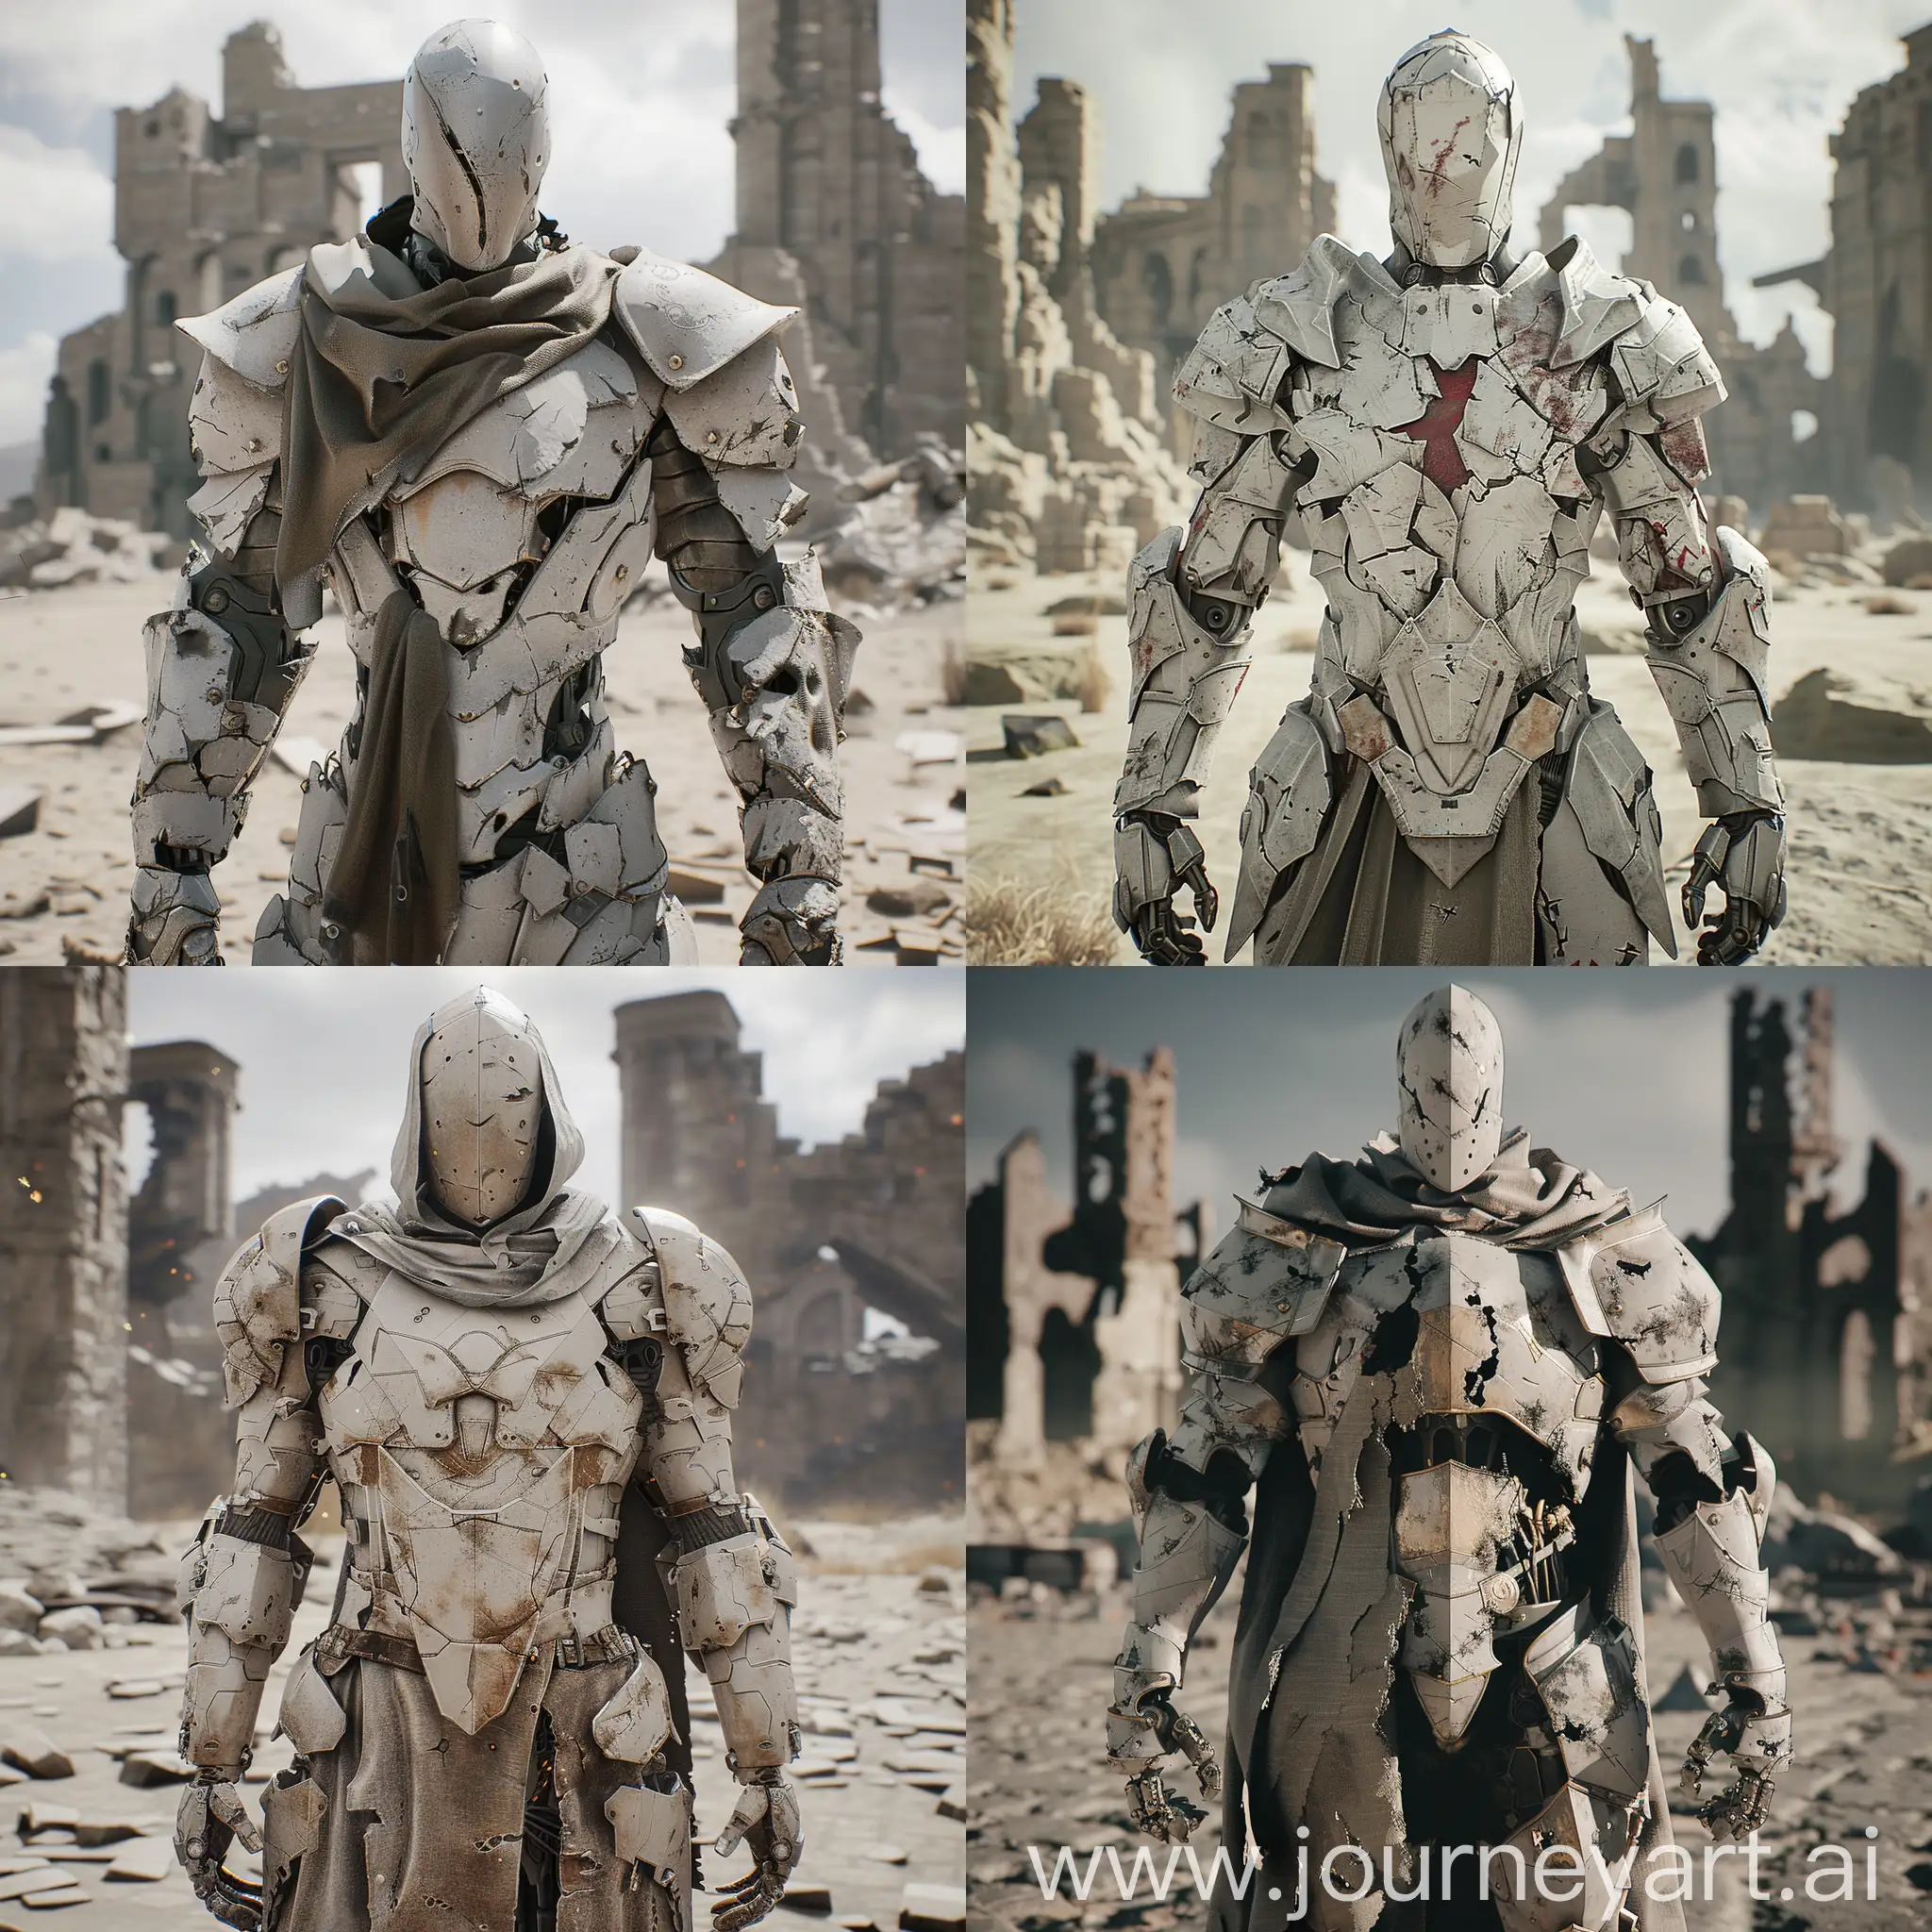 masterpiece, high poly, highly detailed, 4k, high resolution, lifeless, scorcerer, light armour, mechanised knight, no face, warforged, scarred, desolate, empty, holy, armoured robot, light armour, fantasy, humanoid, old, broken armour, torn fabric, time worn, ultra realistic, unreal engine 5, cinematic lighting, magic, destroyed castle ruins in background